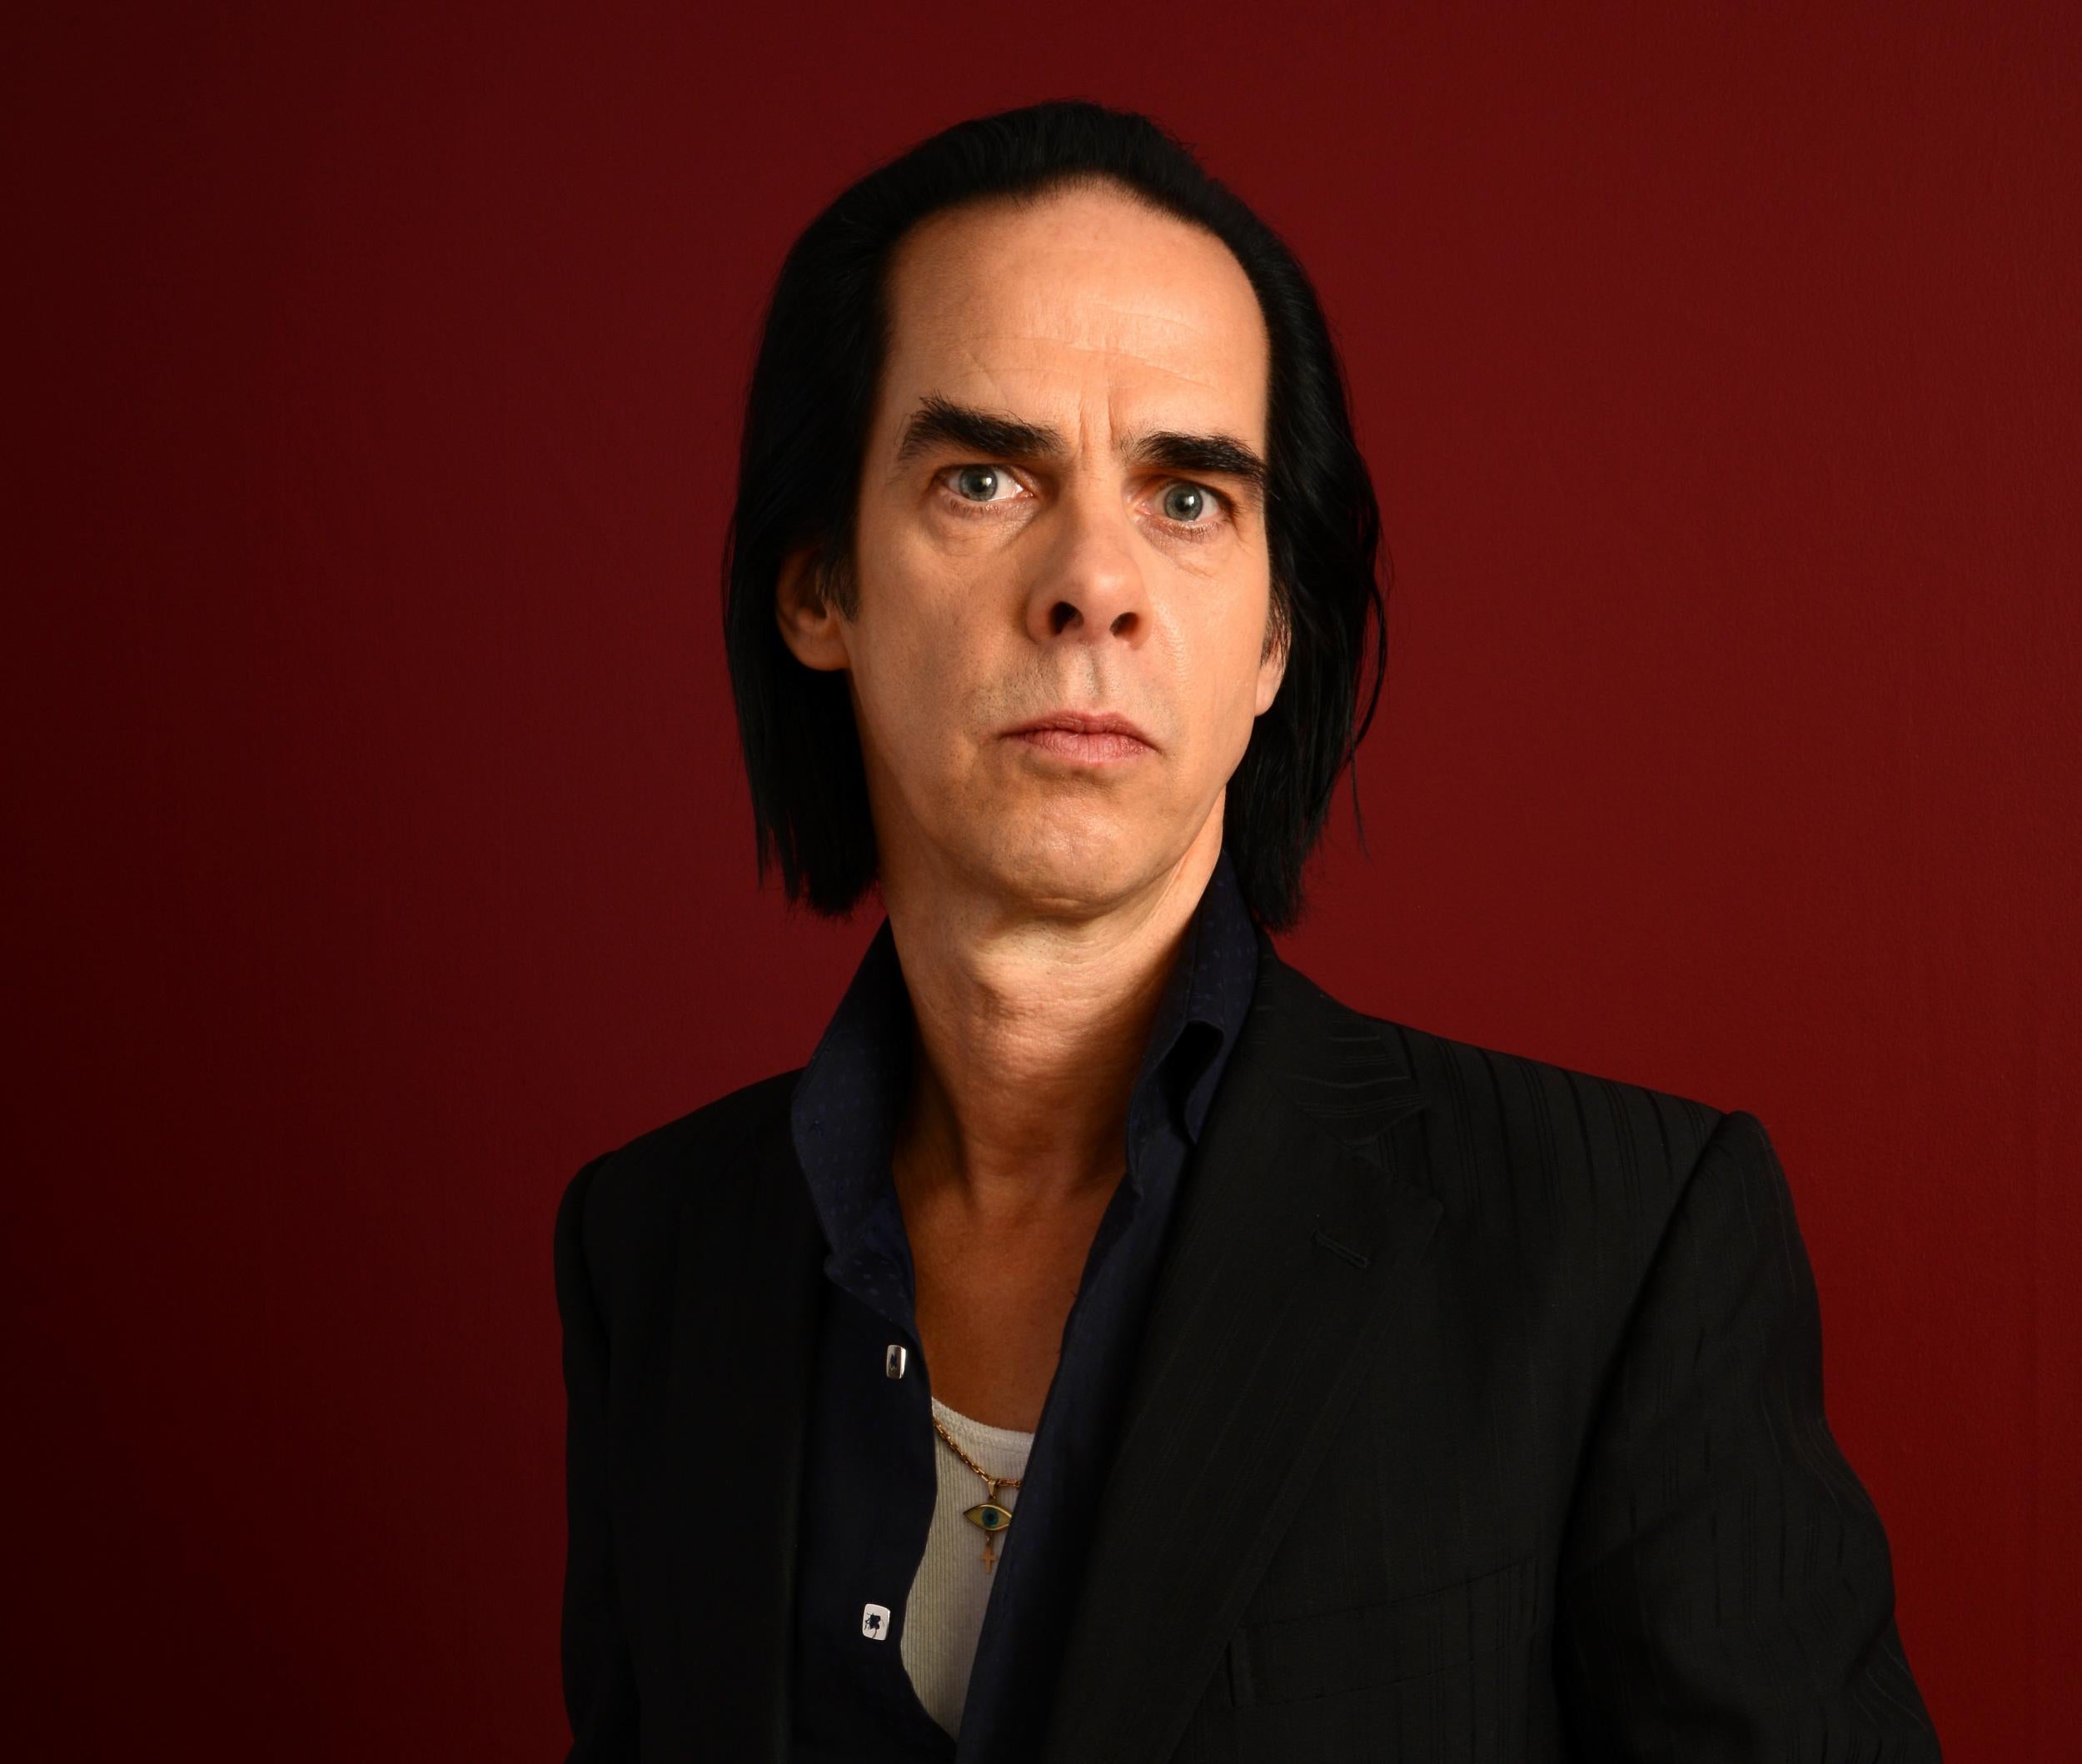 Nick Cave is releasing a new album